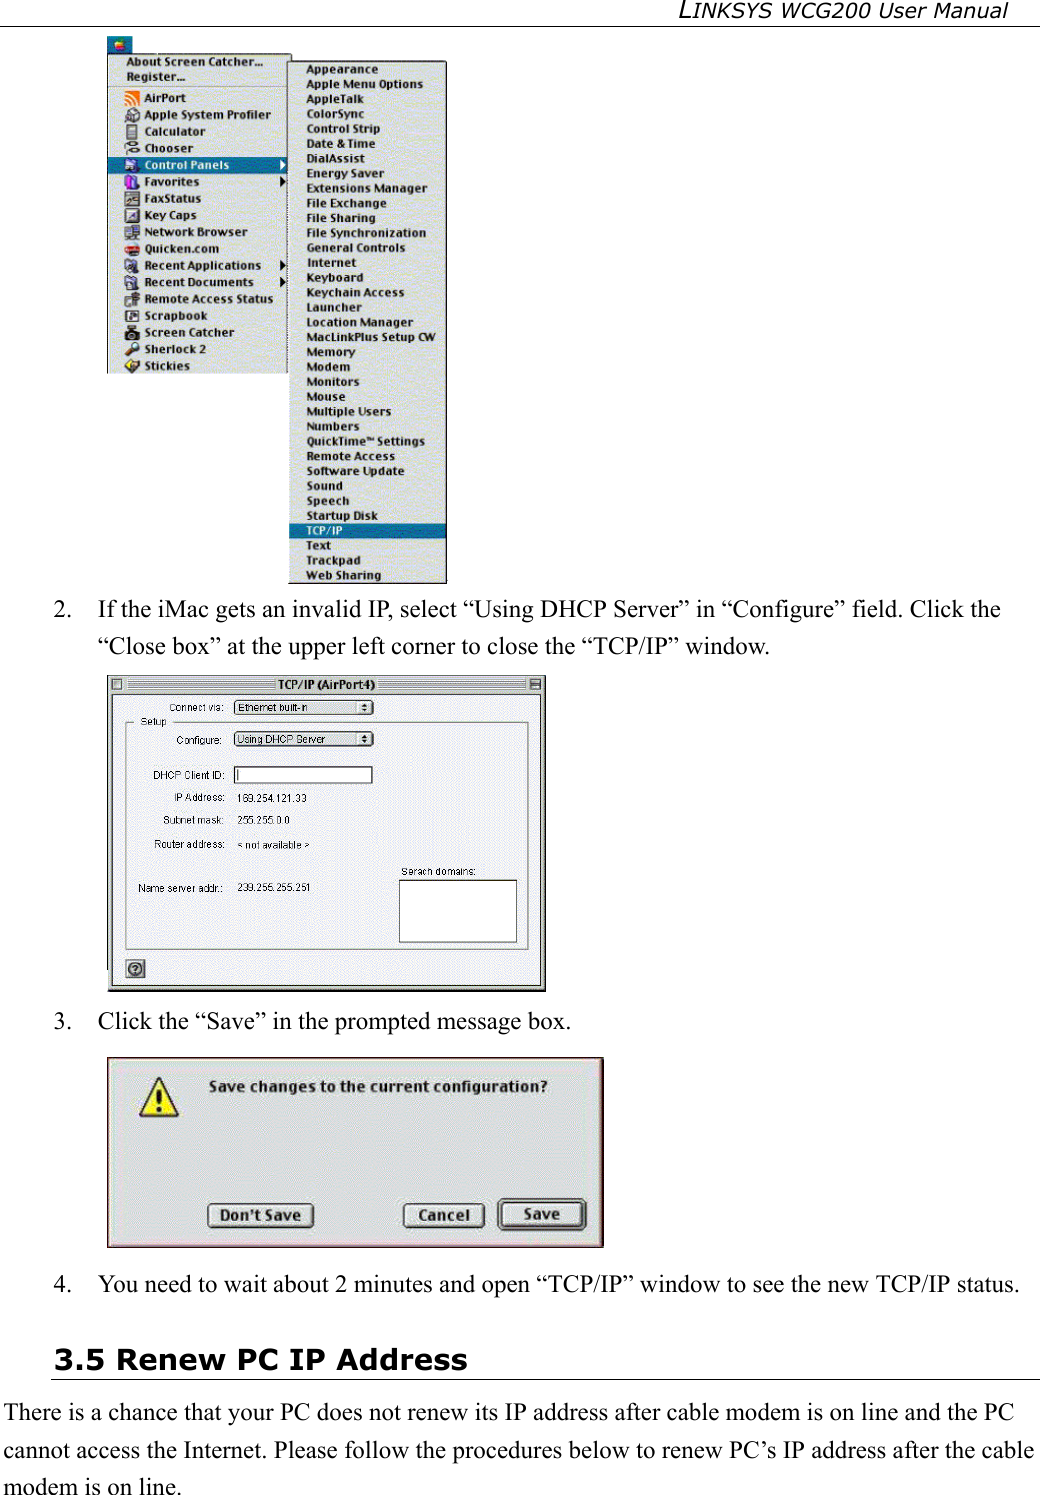 LINKSYS WCG200 User Manual    2.  If the iMac gets an invalid IP, select “Using DHCP Server” in “Configure” field. Click the “Close box” at the upper left corner to close the “TCP/IP” window.  3.  Click the “Save” in the prompted message box.    4.  You need to wait about 2 minutes and open “TCP/IP” window to see the new TCP/IP status. 3.5 Renew PC IP Address There is a chance that your PC does not renew its IP address after cable modem is on line and the PC cannot access the Internet. Please follow the procedures below to renew PC’s IP address after the cable modem is on line. 